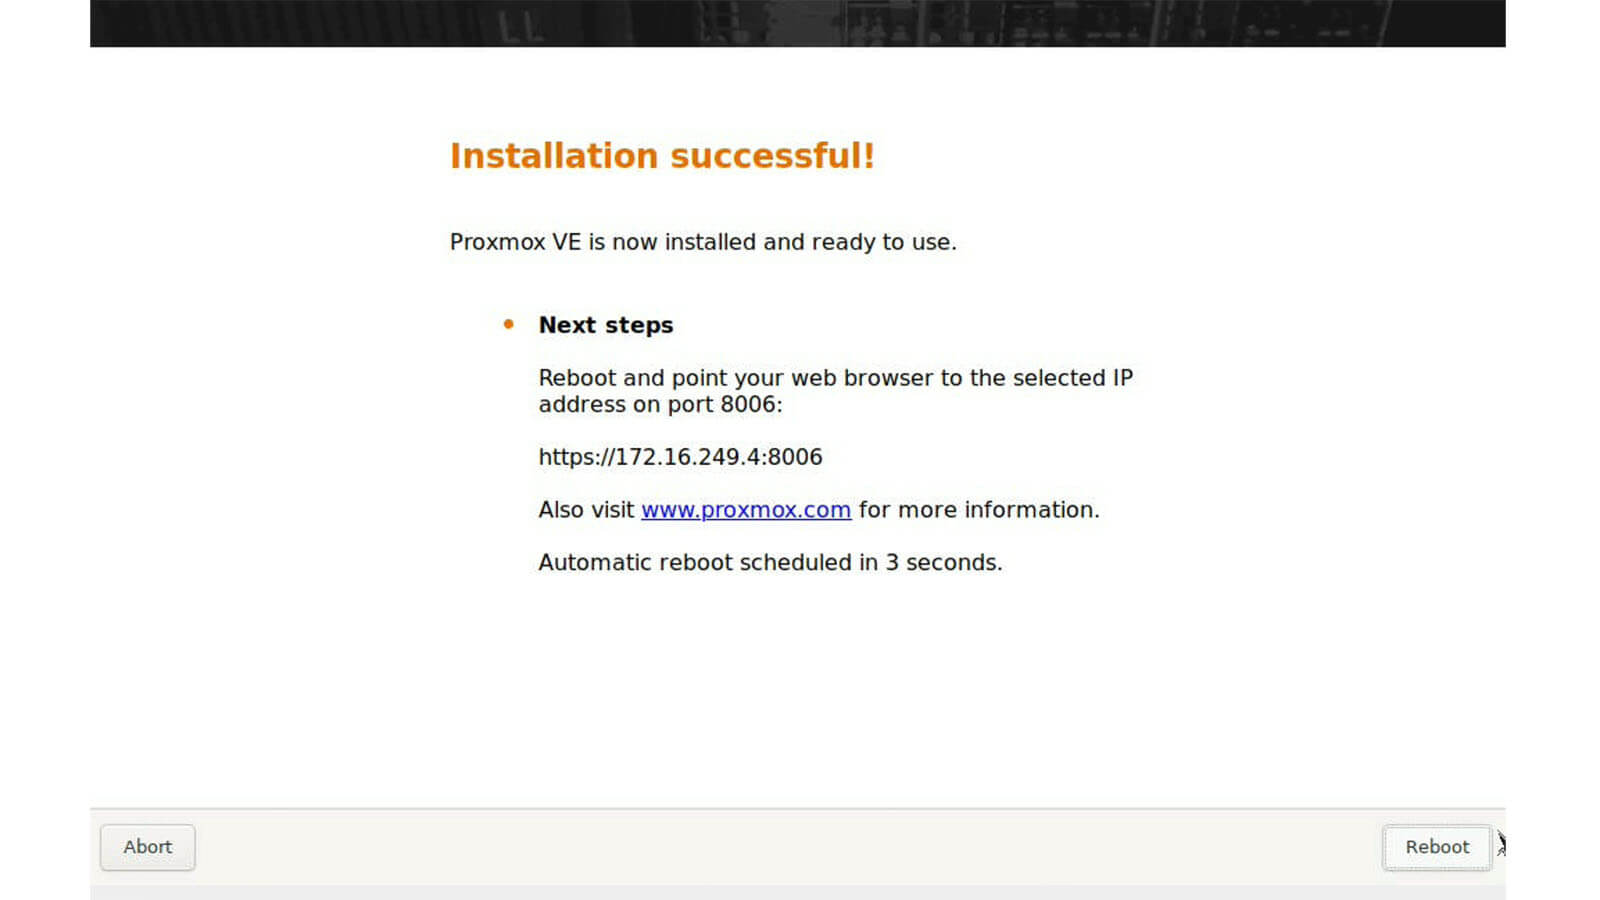 Proxmox Home Assistant Install Screen Step 5 Finished